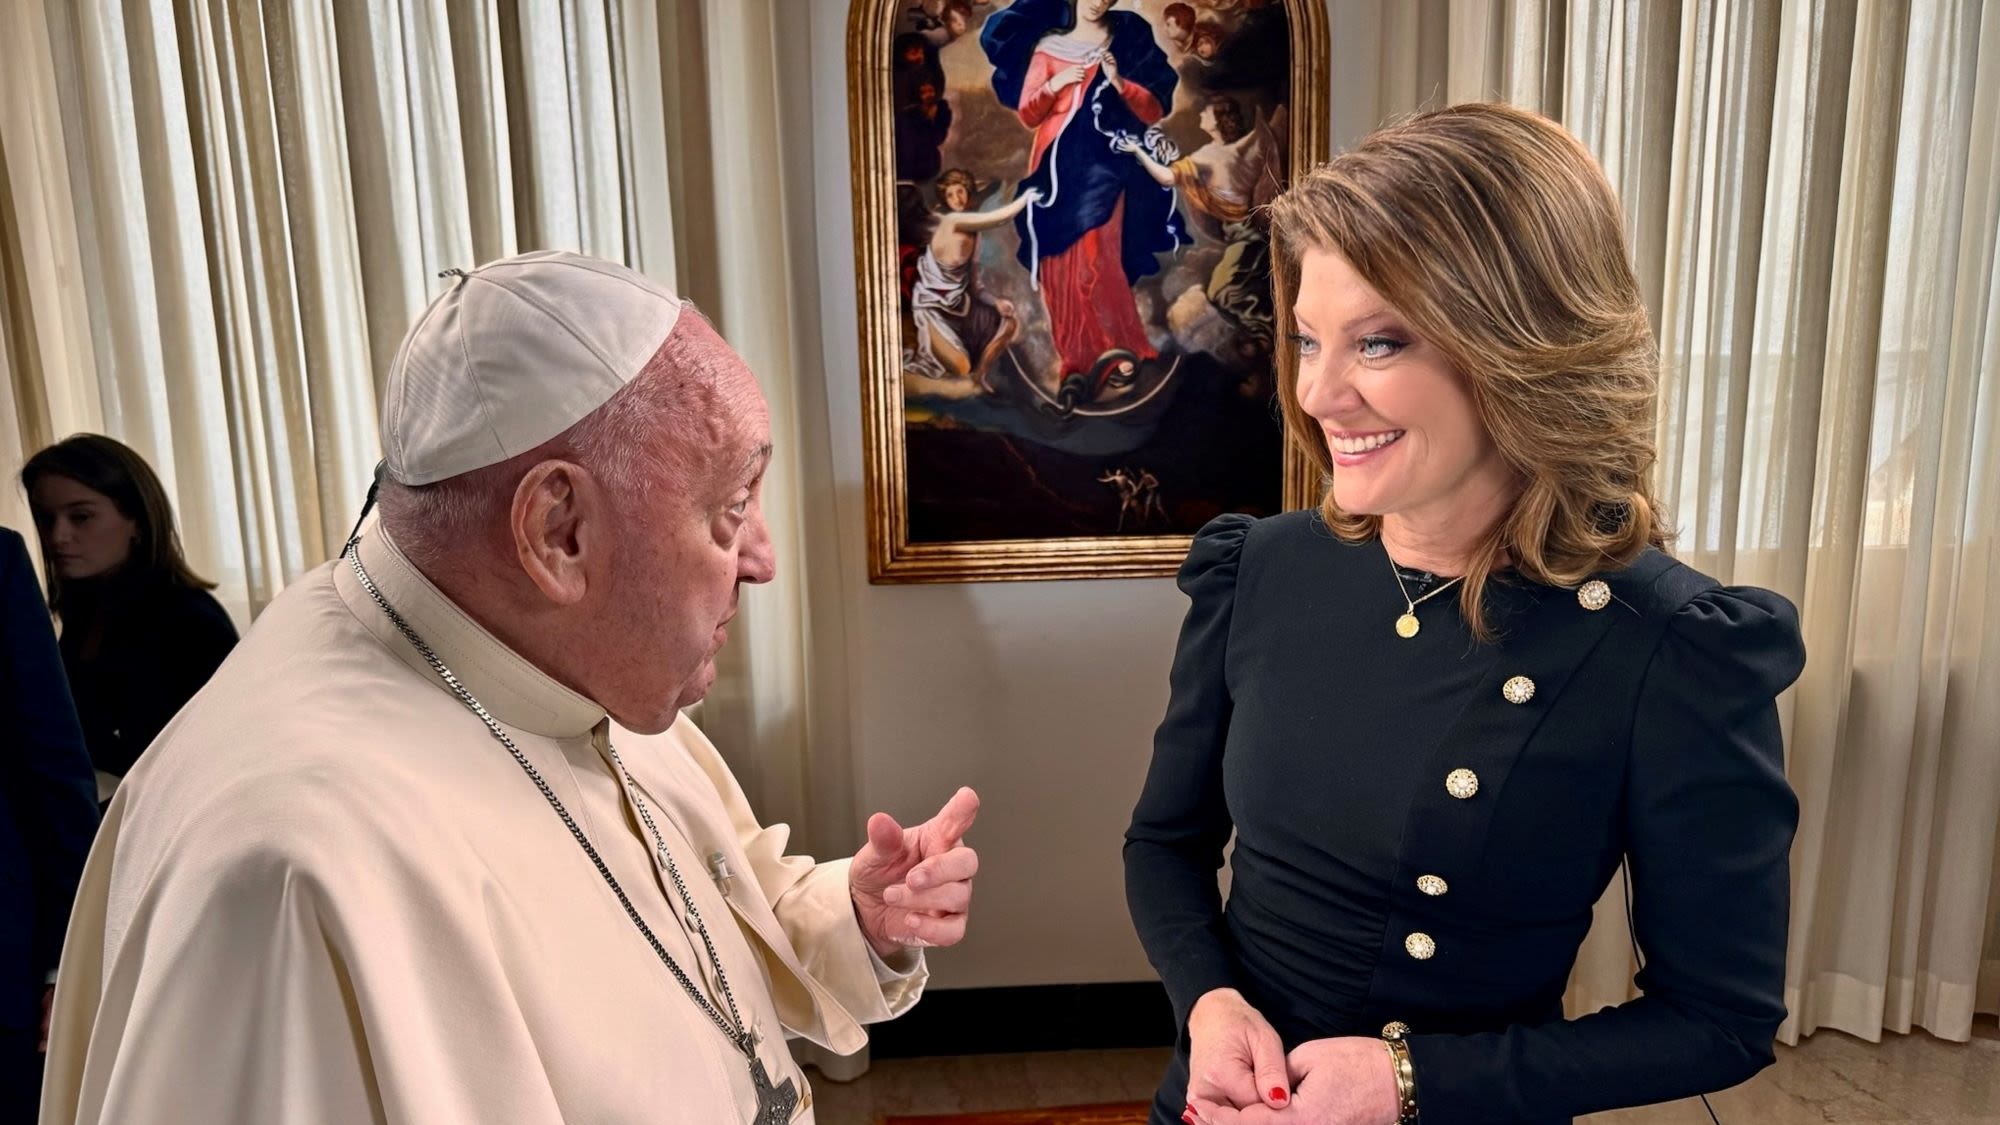 Norah O'Donnell interview with Pope Francis gets primetime special on CBS tonight, May 20